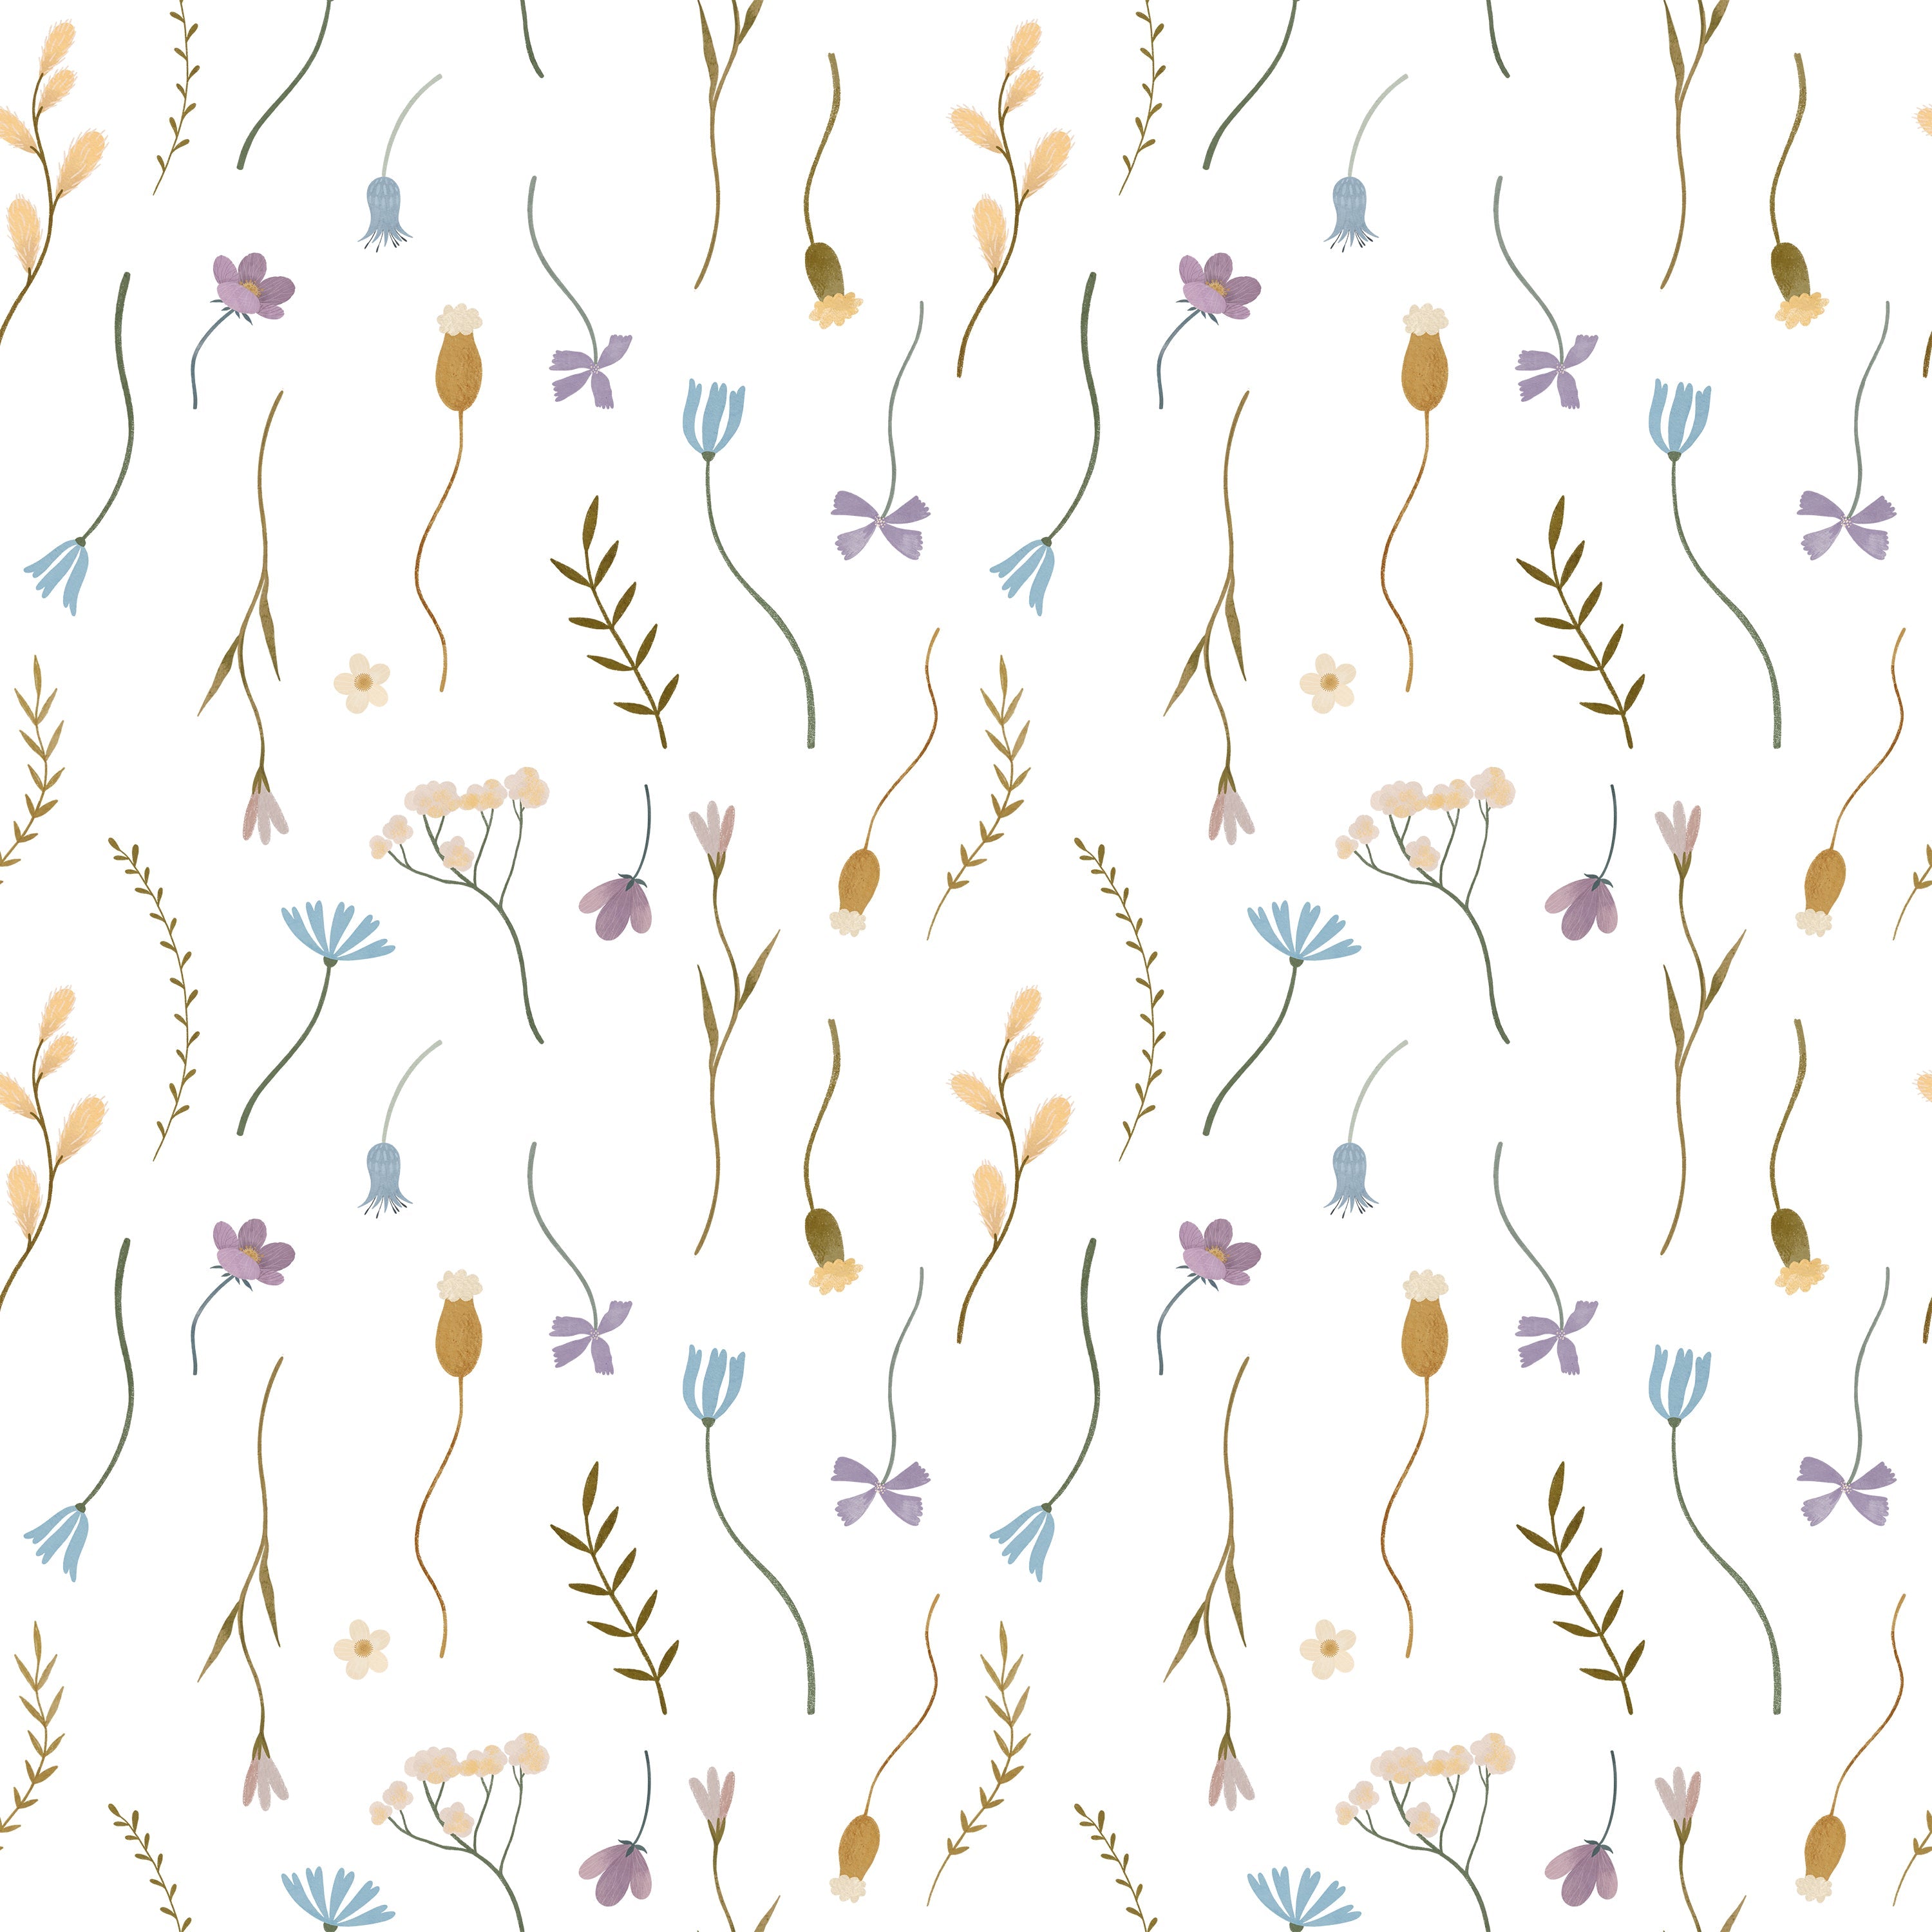 A delicate and playful wallpaper pattern featuring an assortment of whimsical flowers and plants scattered in a random layout. The design includes slender stems, tiny buds, and floral elements in soft shades of gold, blue, and purple, set against a clean white background. This minimalist yet charming pattern brings a light and airy feel, perfect for creating a serene space.